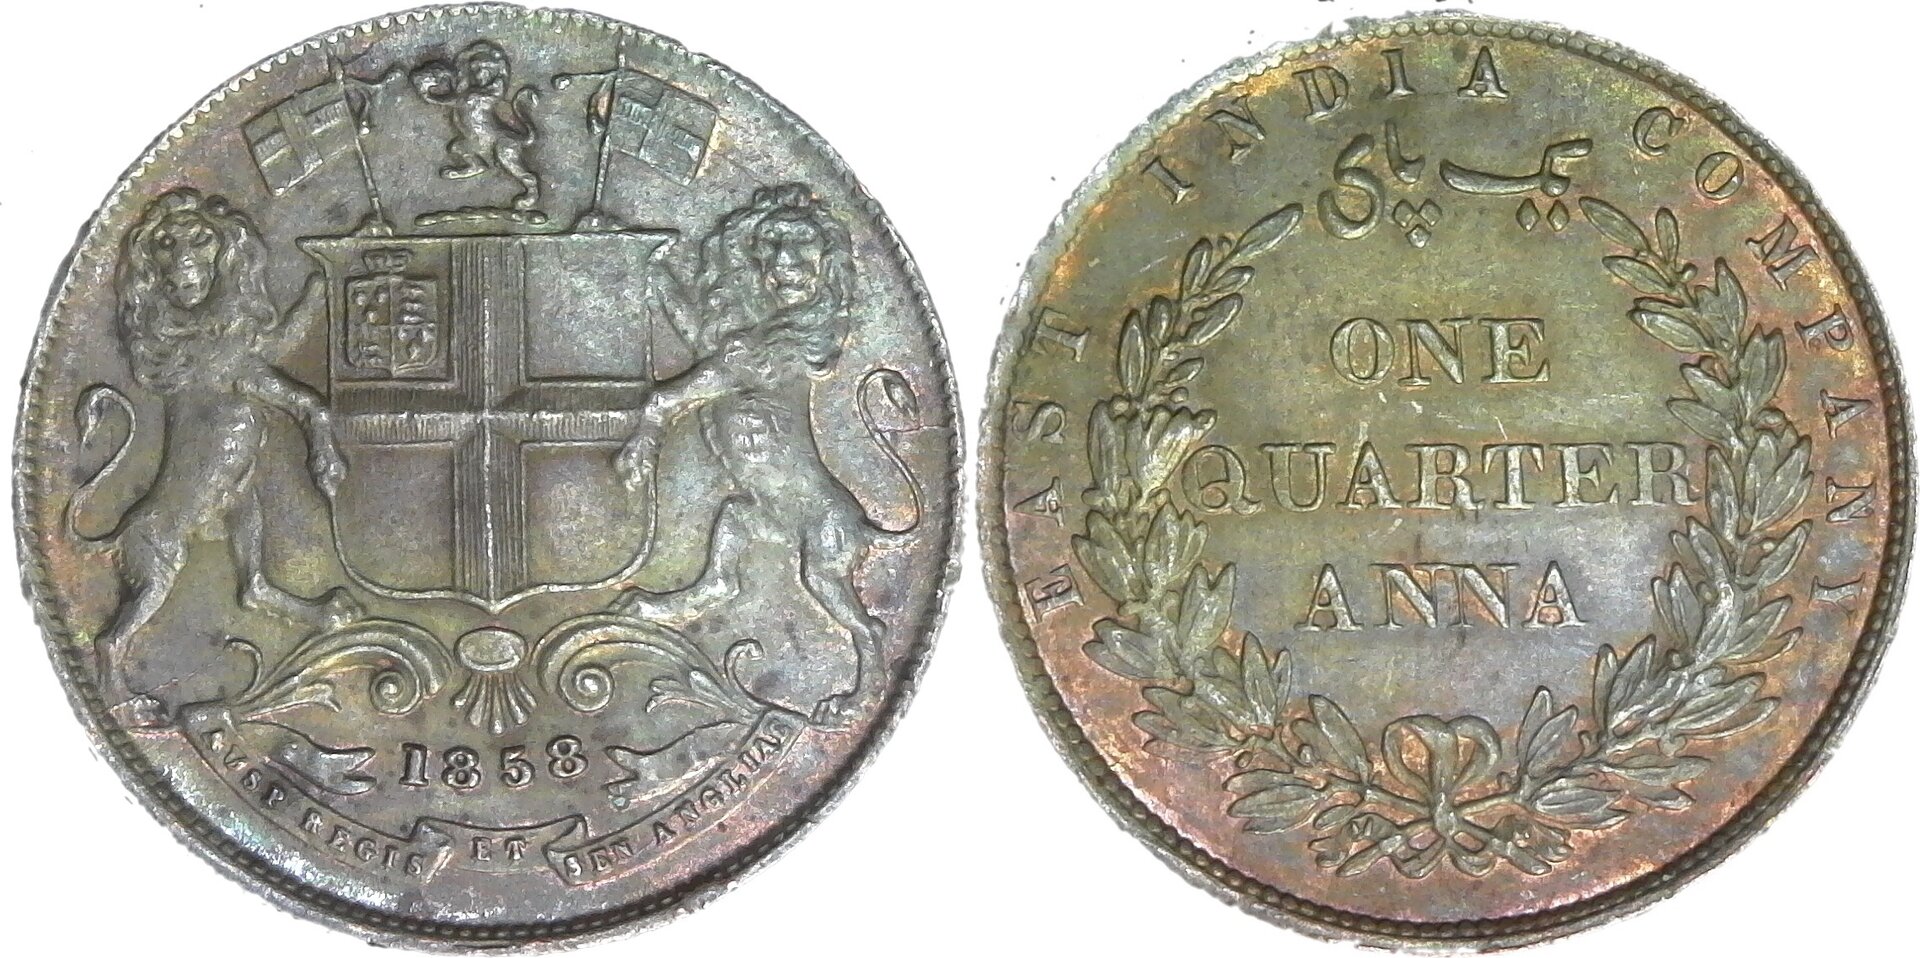 India East India Company One Qtr Anna 1858 obv-cutout-side.jpg